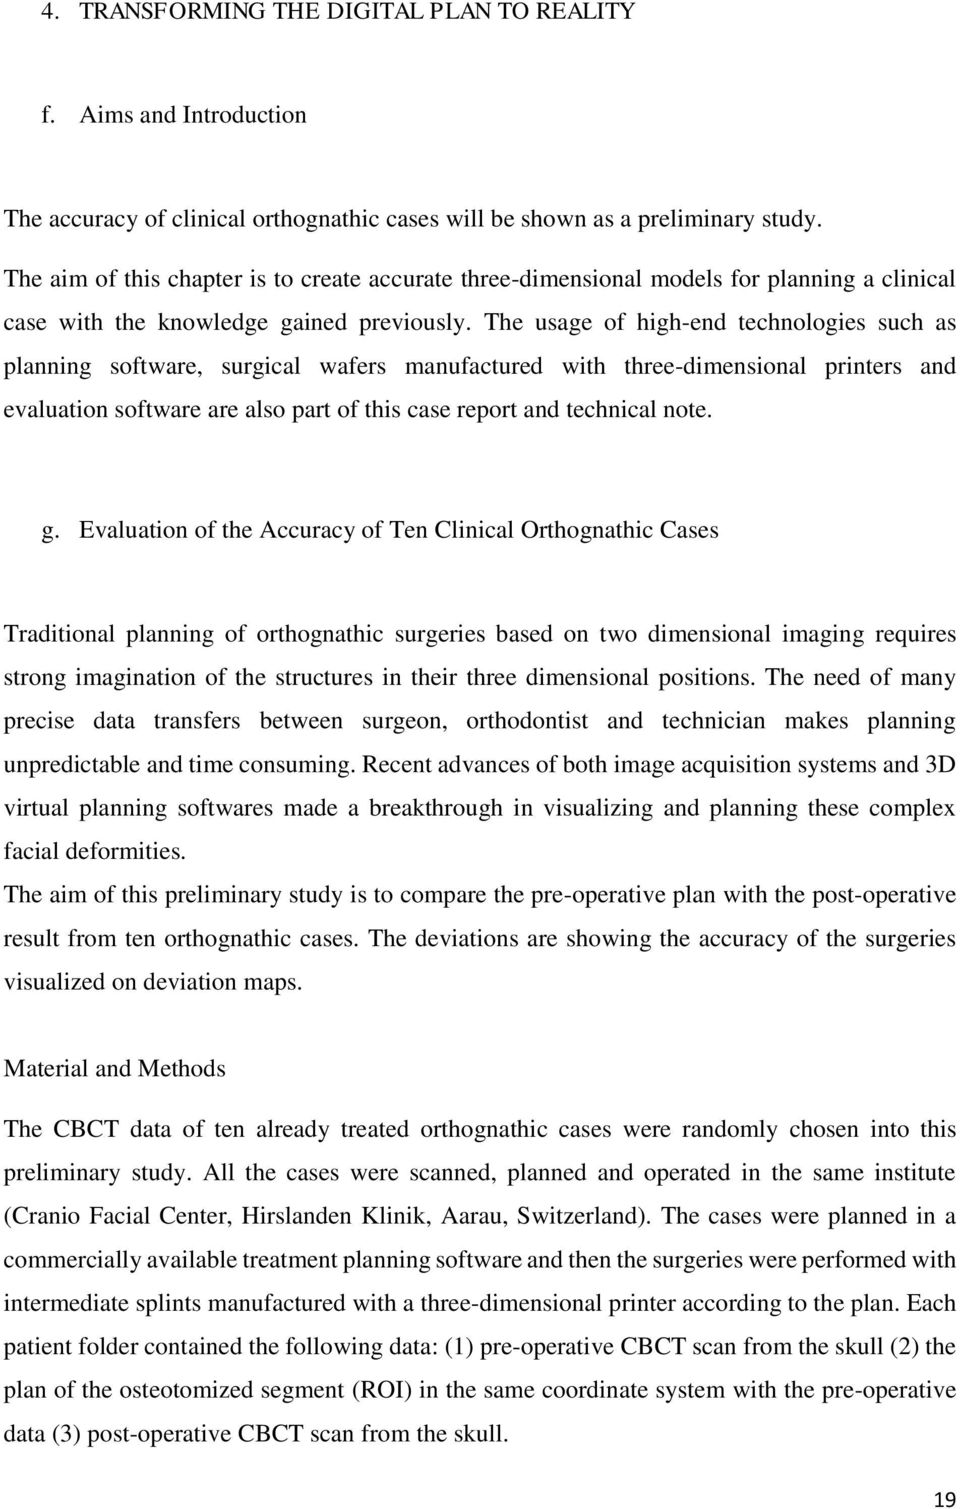 The usage of high-end technologies such as planning software, surgical wafers manufactured with three-dimensional printers and evaluation software are also part of this case report and technical note.